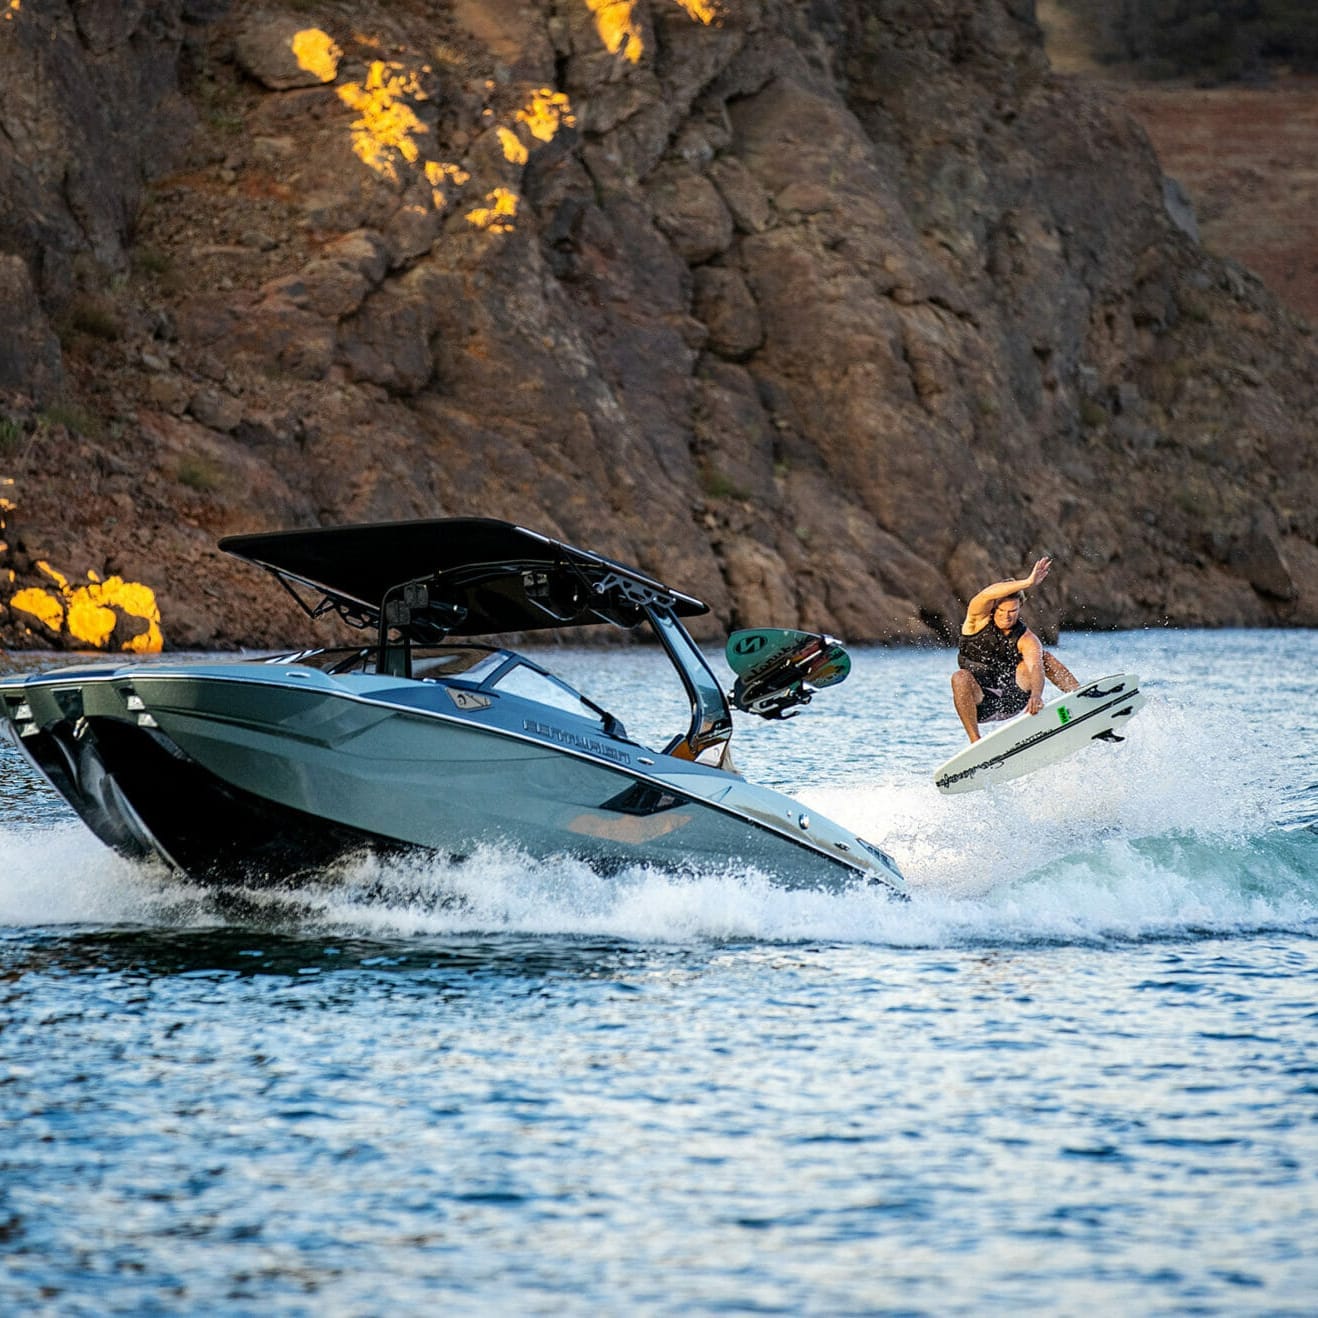 A person is riding a wakesurf board on a wakeboat.